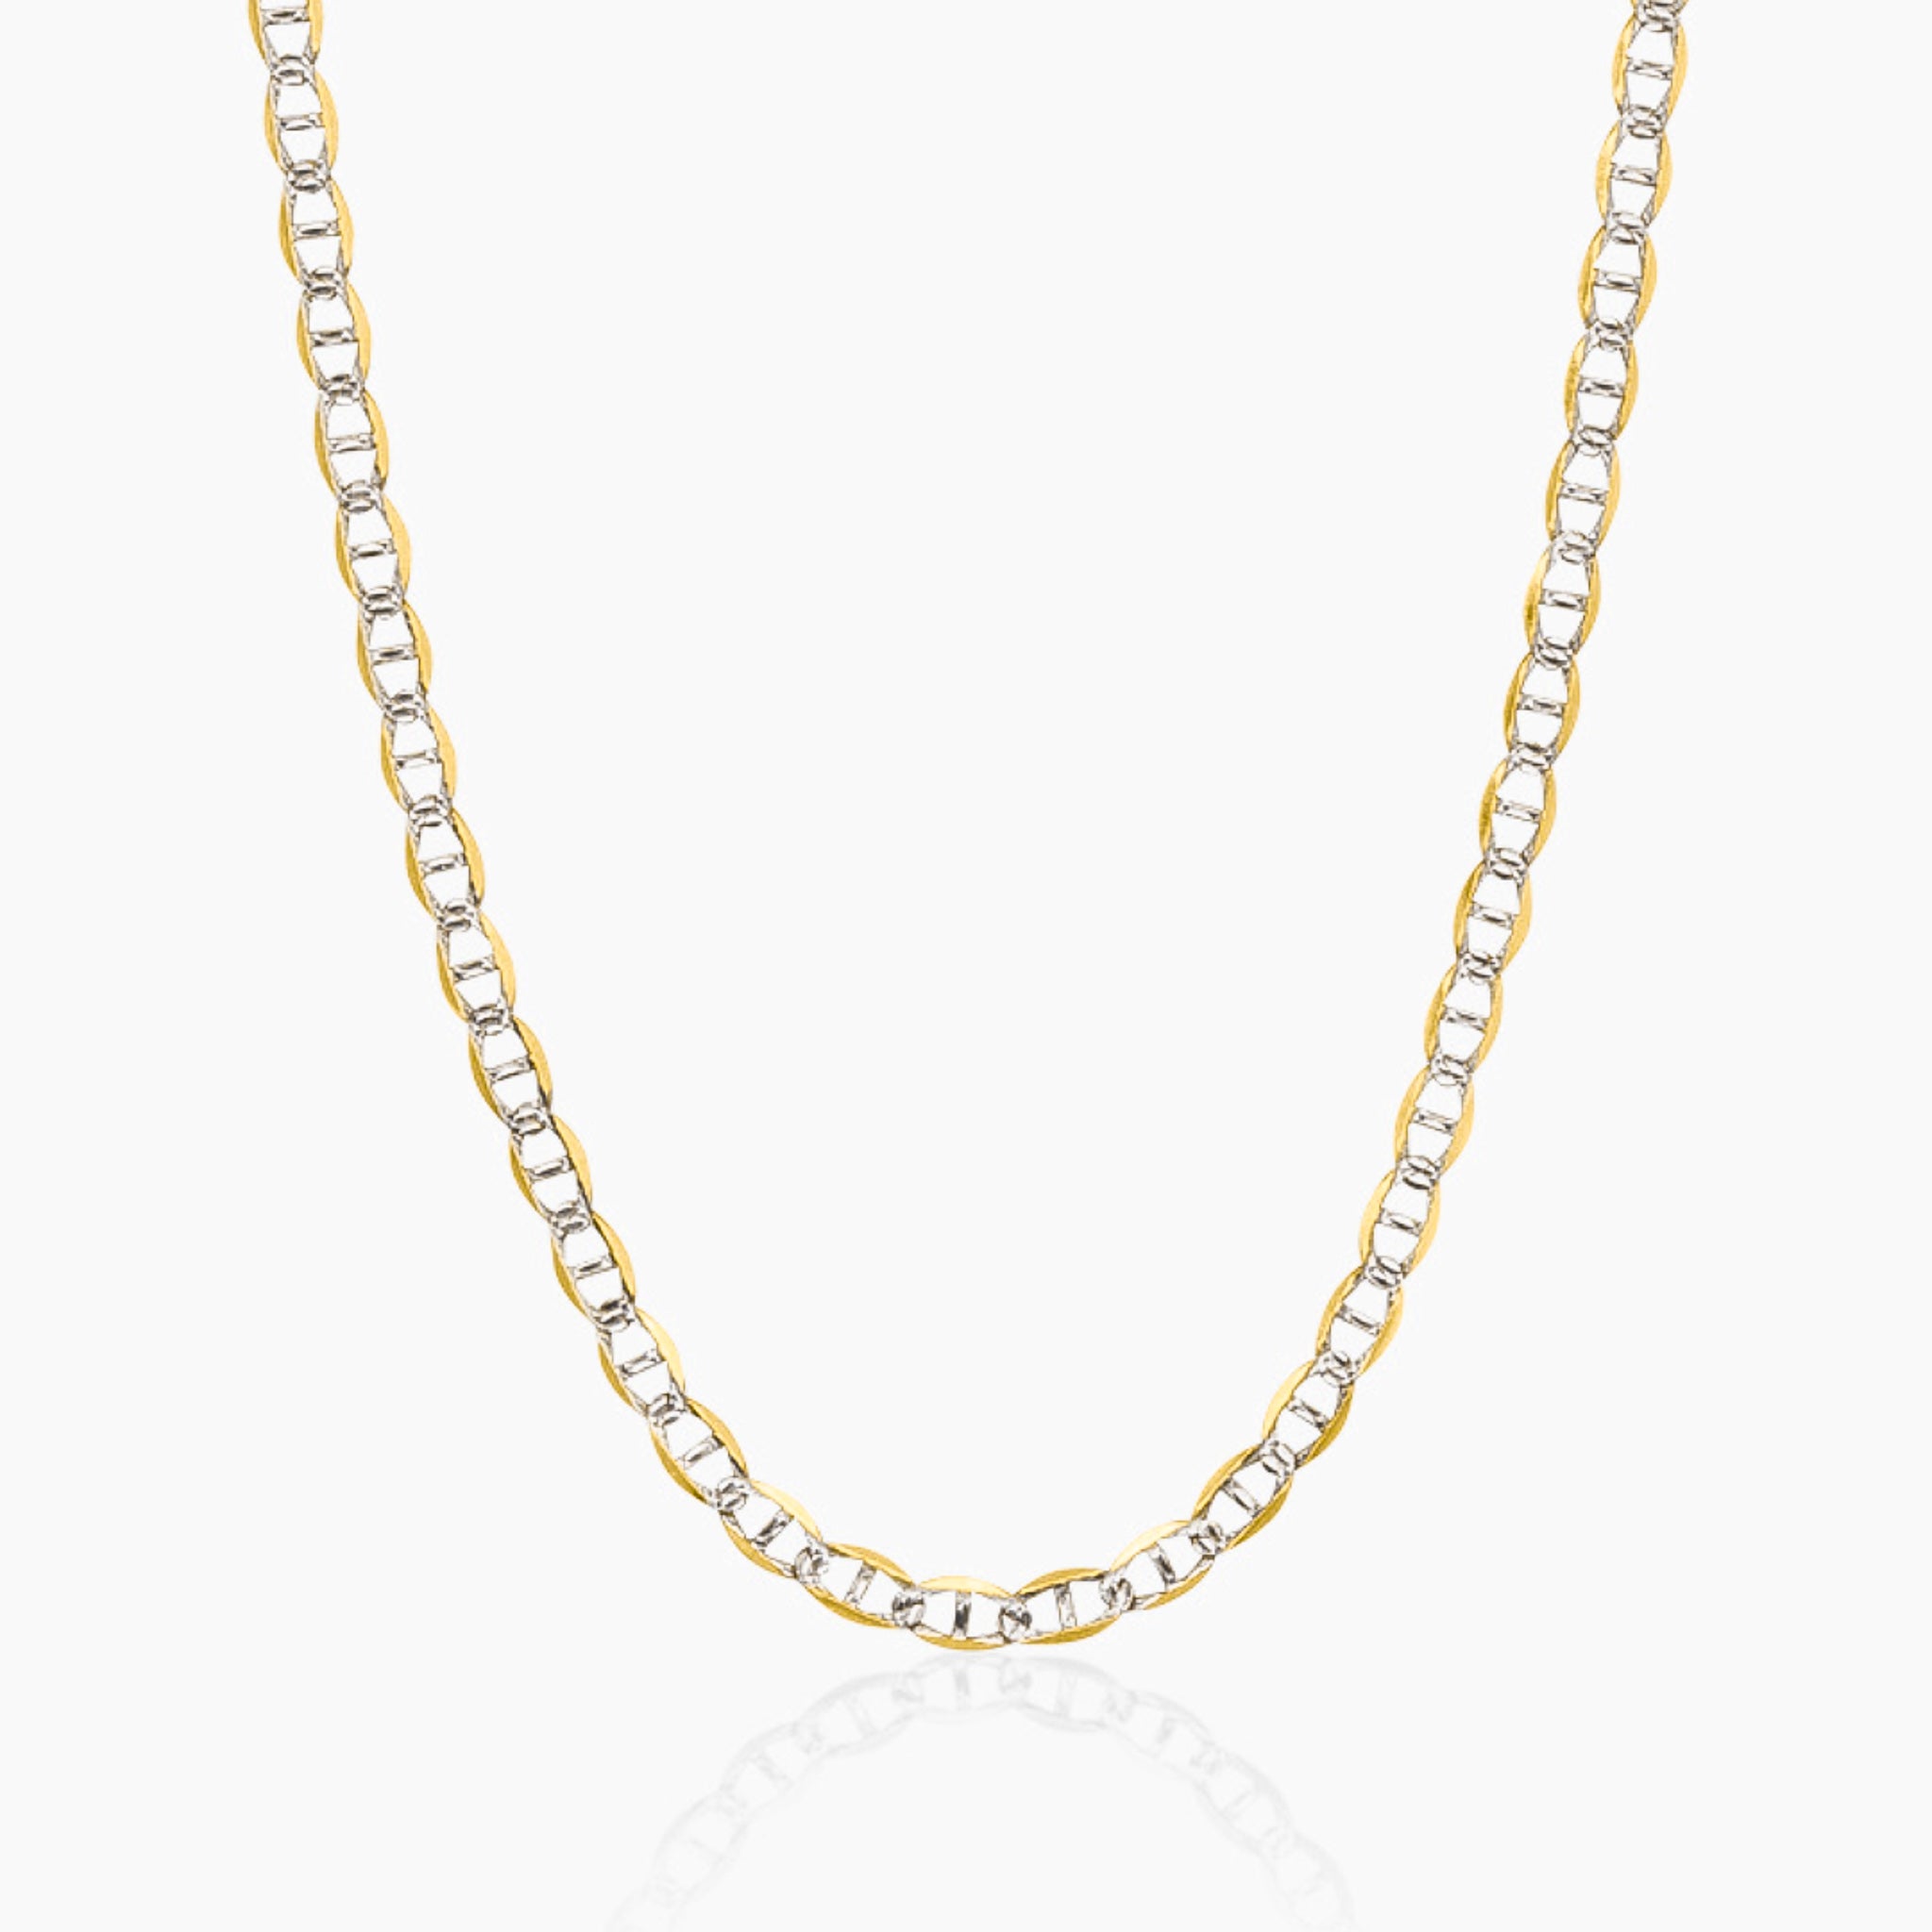 14K YELLOW GOLD TWO TONED MARINER CHAIN -2MM